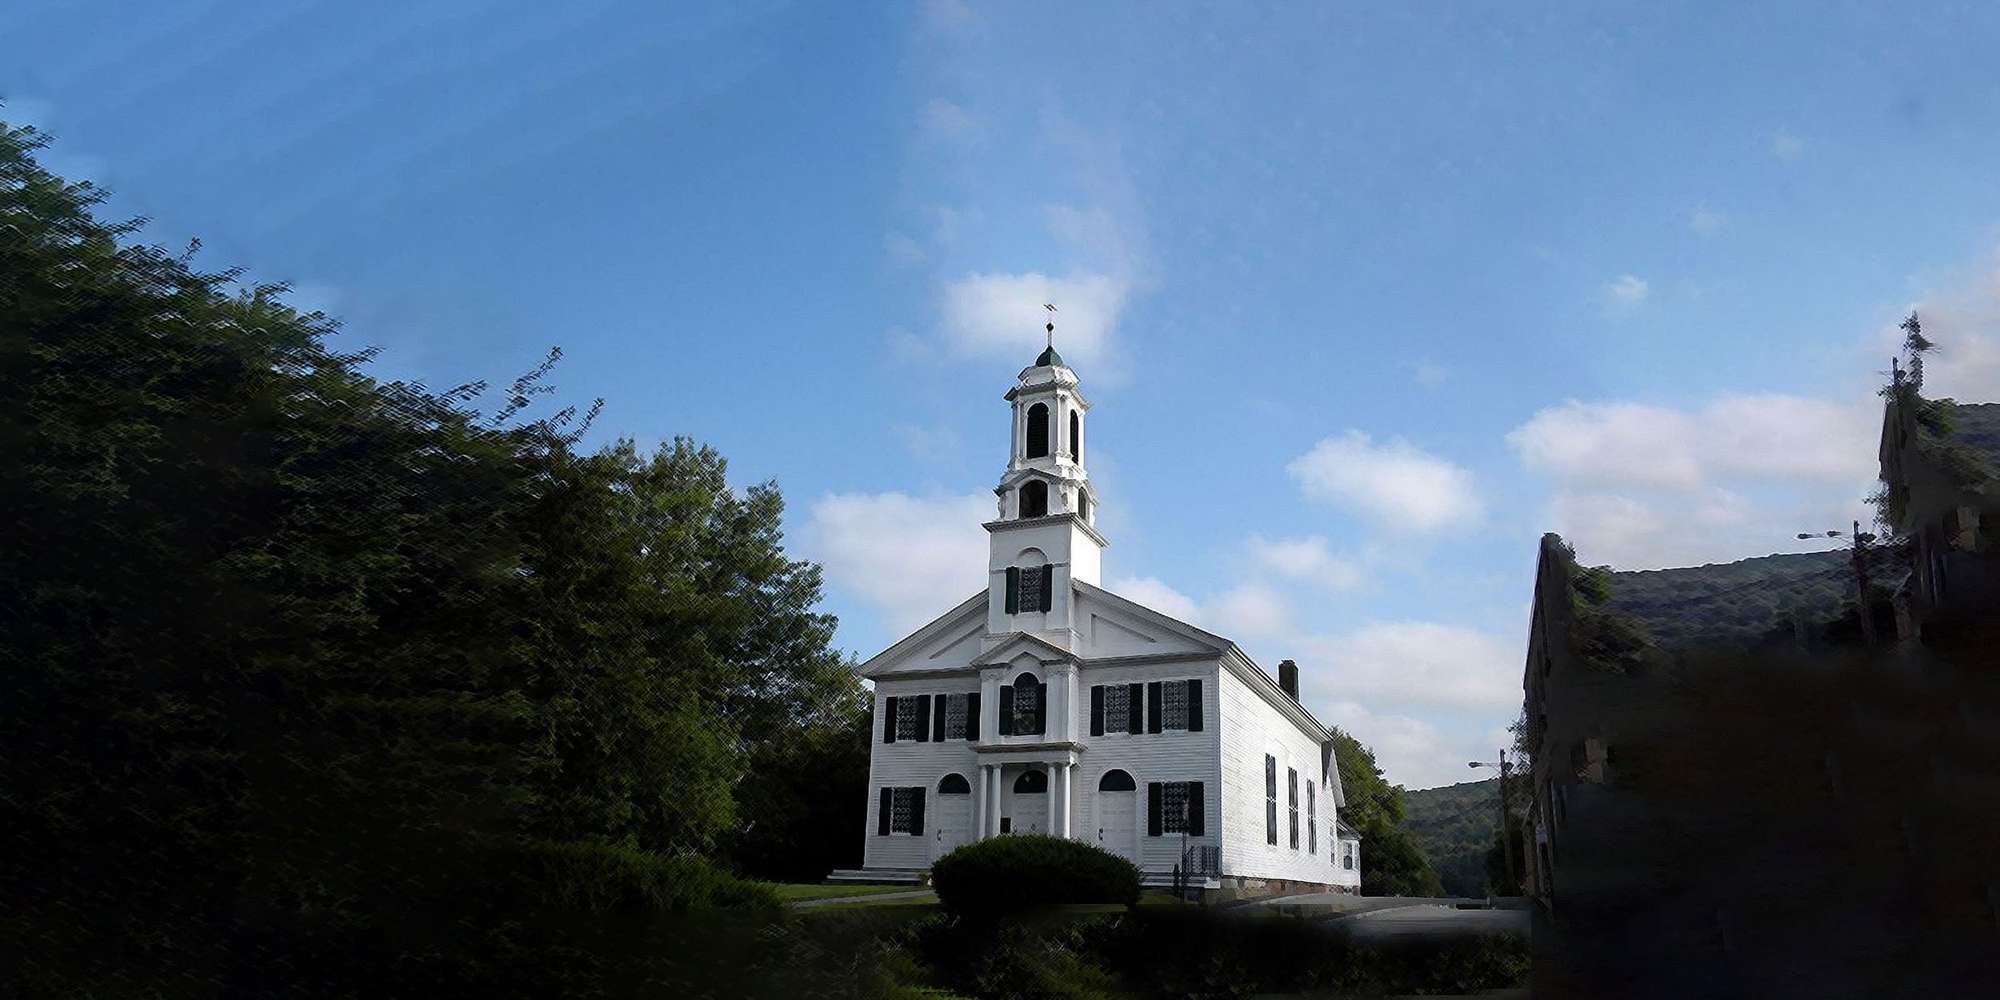 Photo of the First Congregational Church in Lebanon, New Hampshire